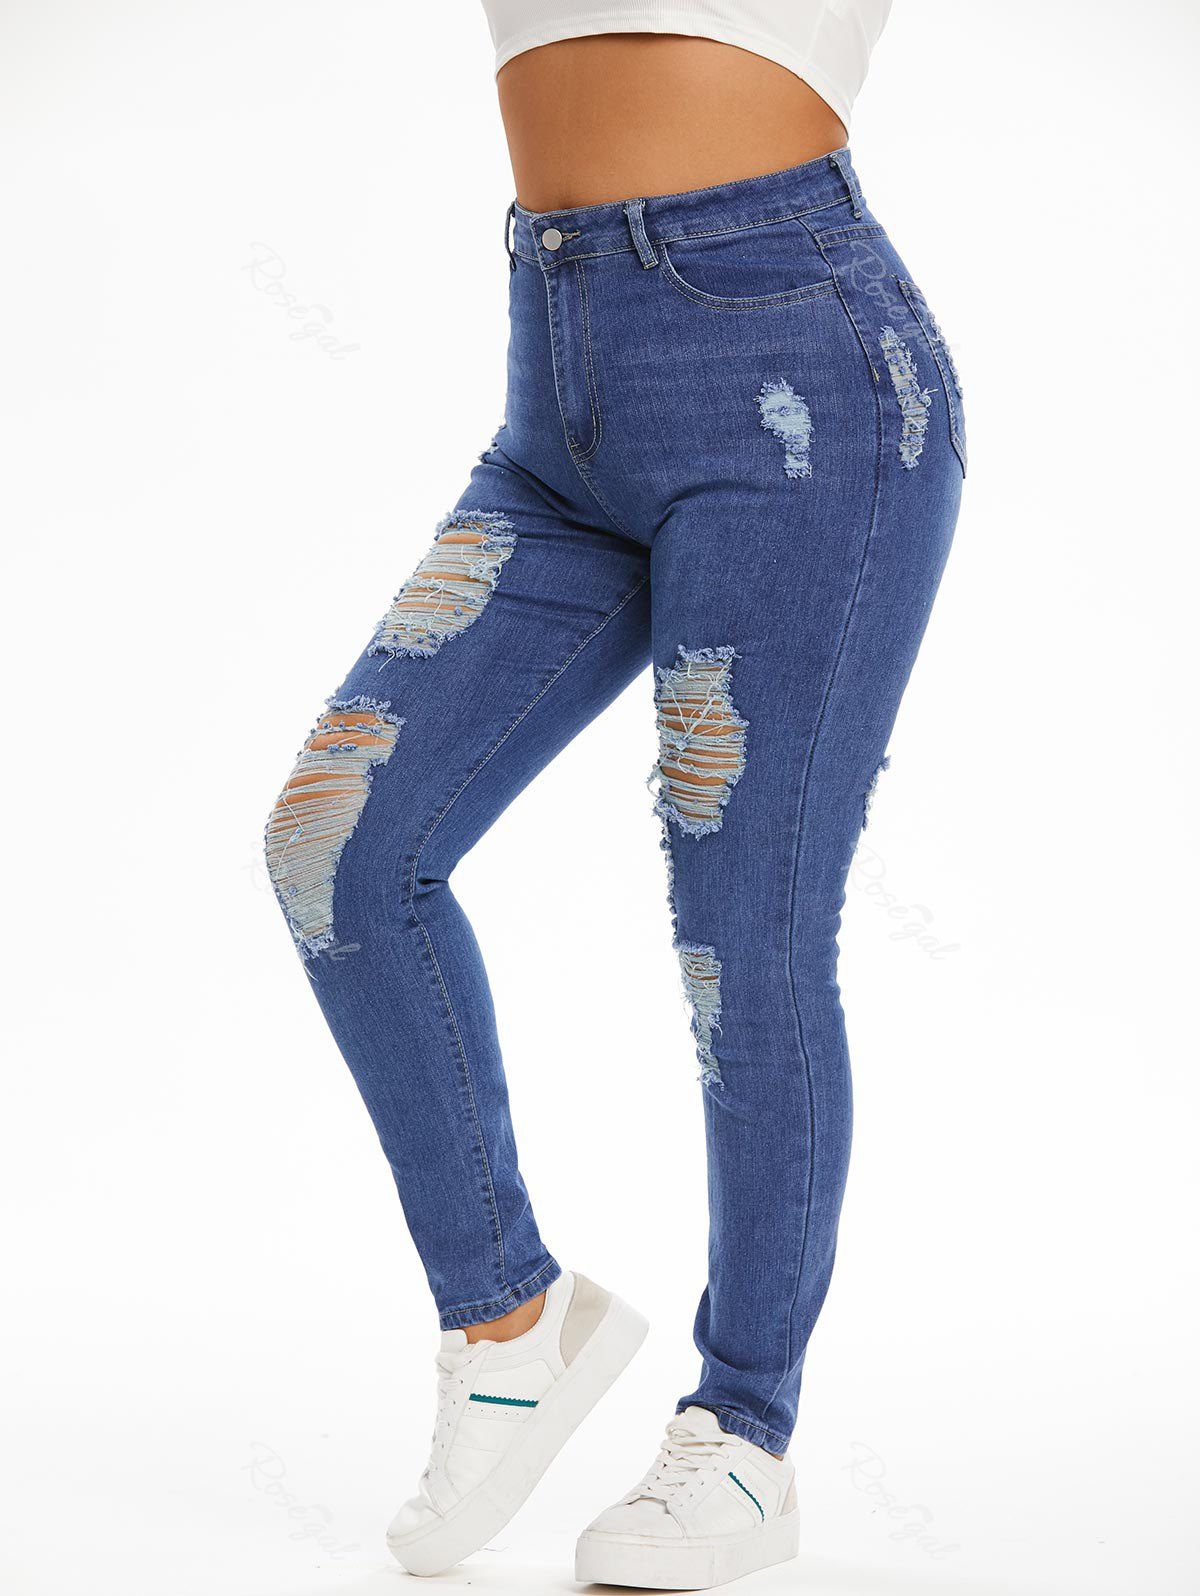 Buy Plus Size&Curve Skinny Distressed Destroyed Jeans  